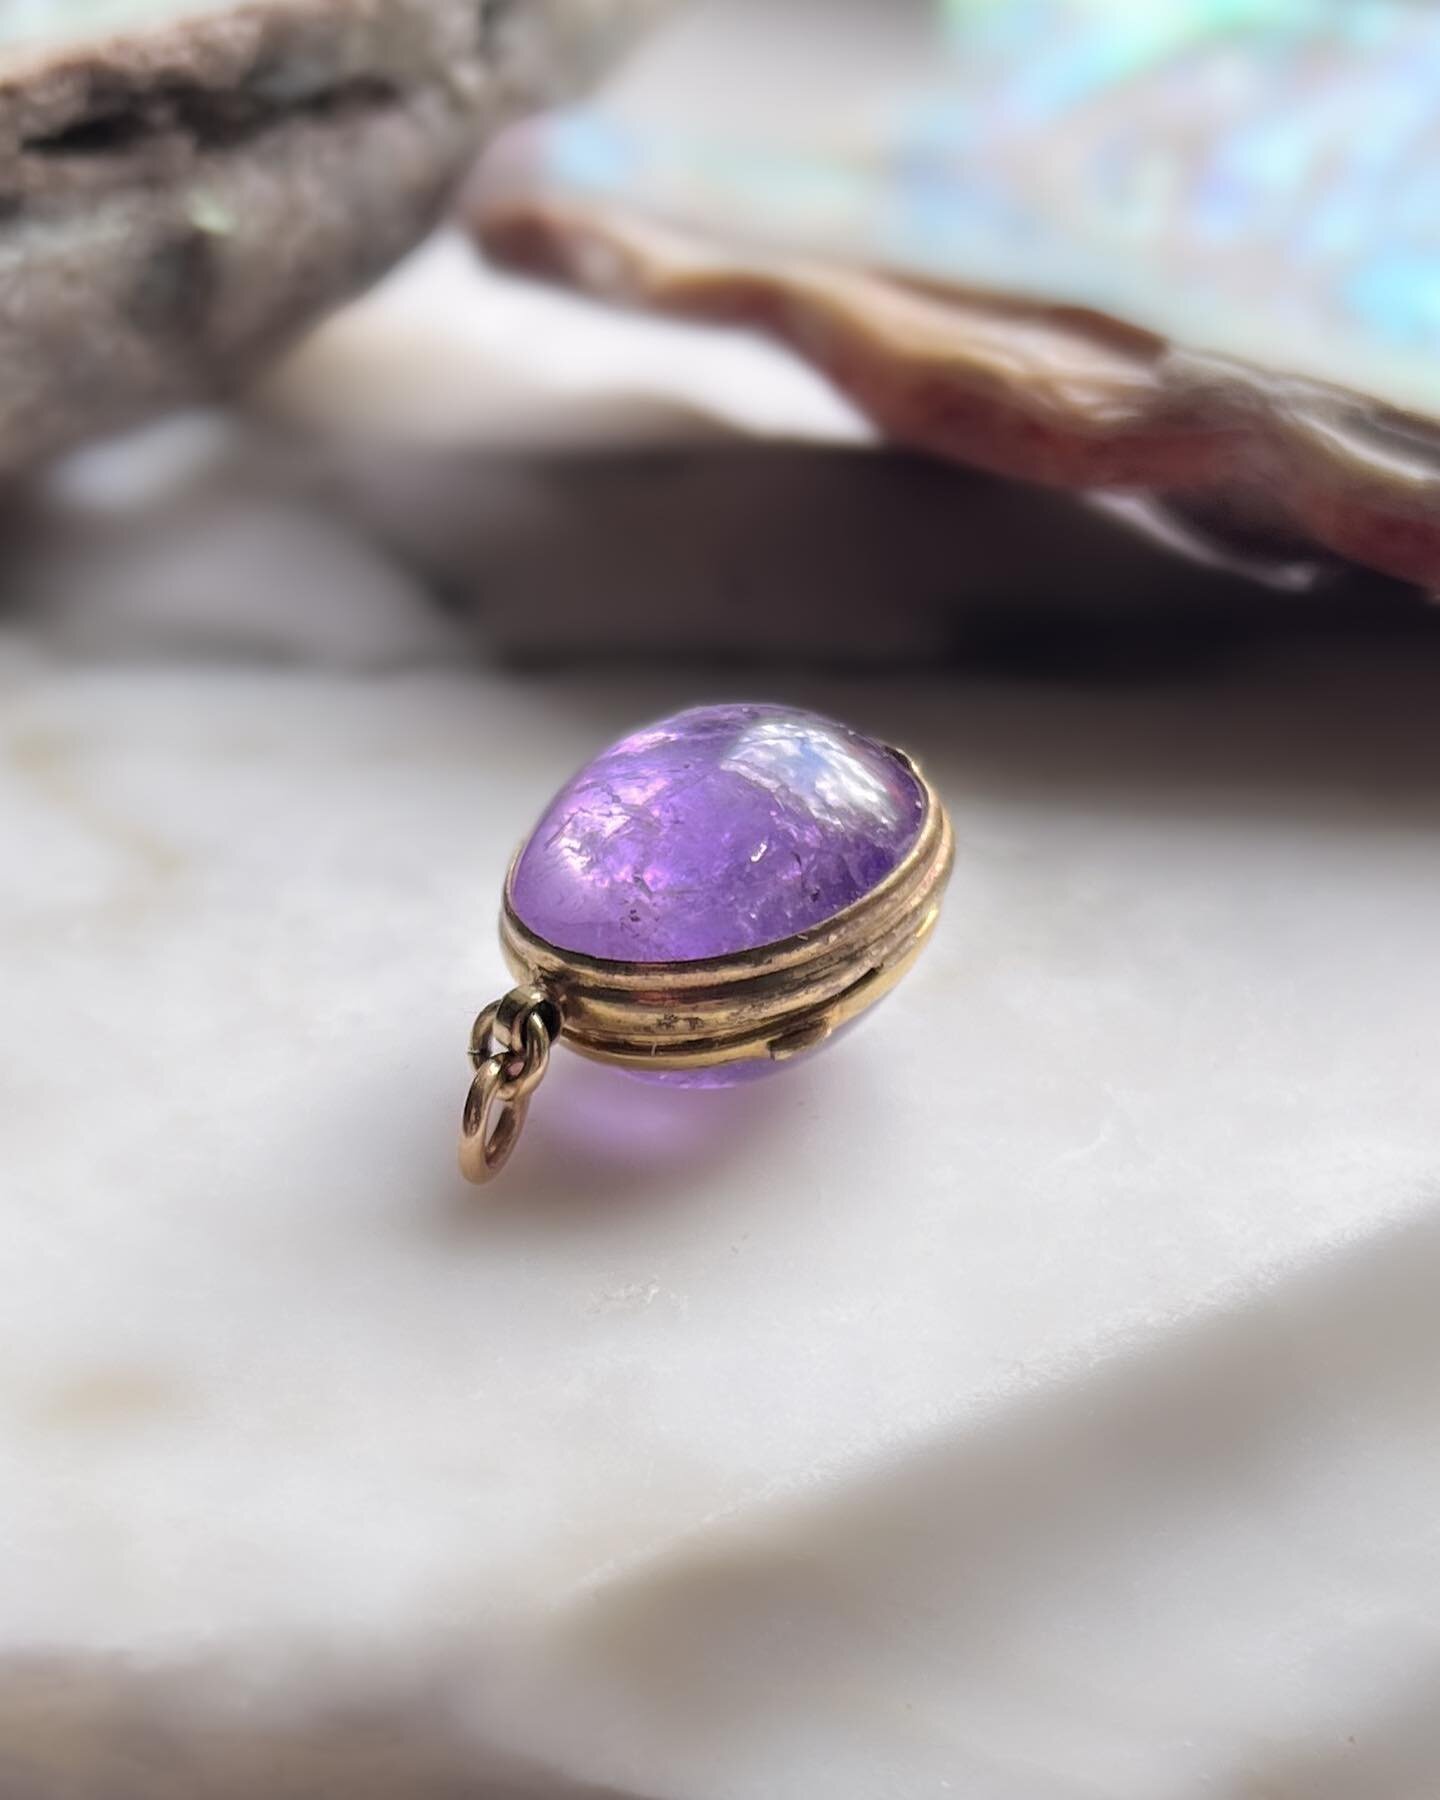 19th c. oval or egg-shaped locket formed from a pair of amethyst cabochons mounted in a gold hinged gilt copper frame. There is a space between the stones when the locket is closed to hold a photograph or pressed flower keepsake. The gemstones are a 